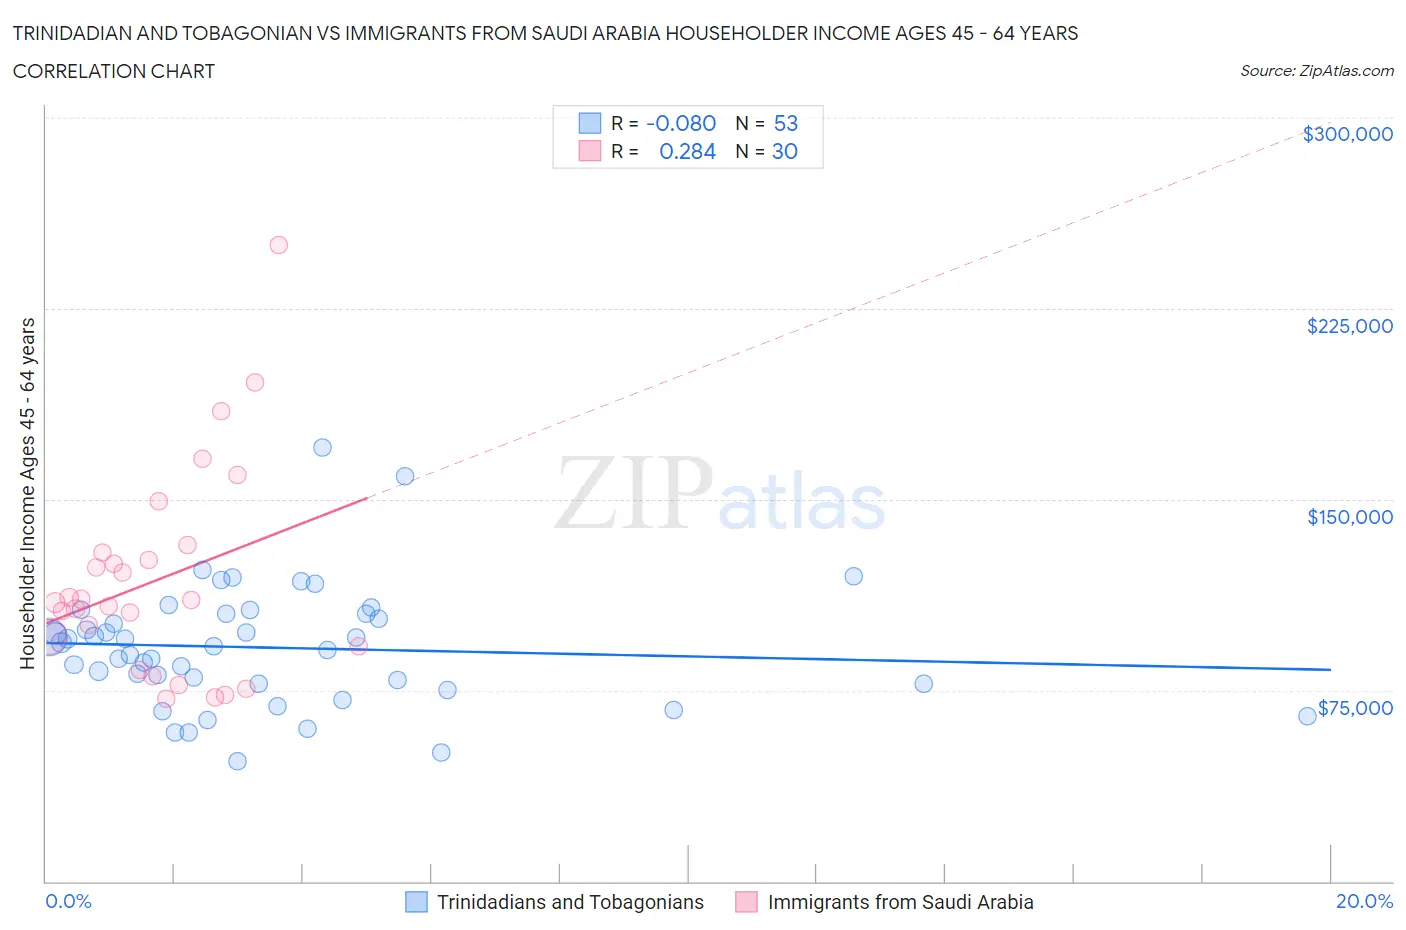 Trinidadian and Tobagonian vs Immigrants from Saudi Arabia Householder Income Ages 45 - 64 years